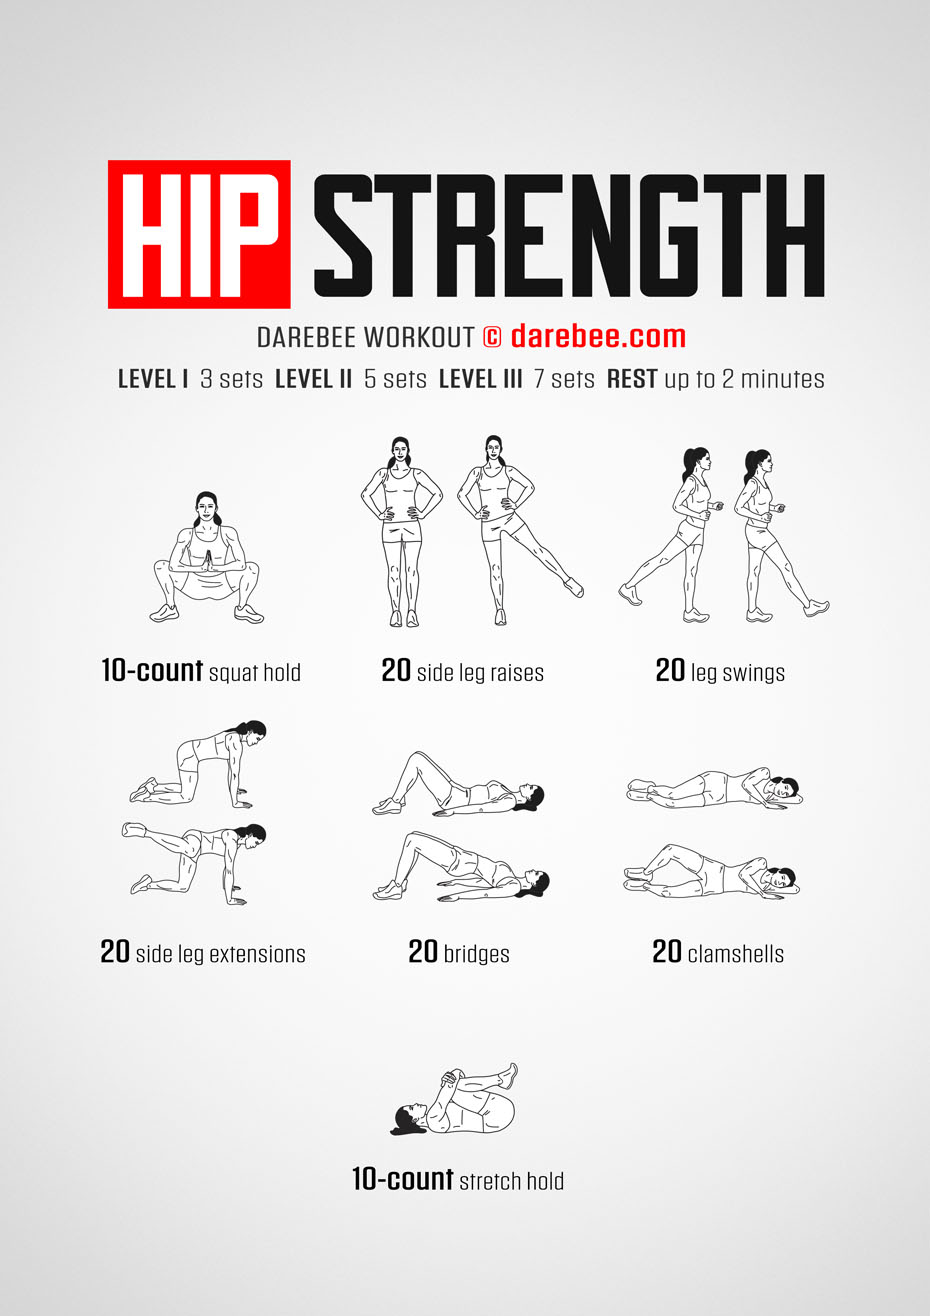 Hip Strength is a Darebee home-fitness workout that helps you increase the power of your lower body by increasing range of movement (ROM) of the pelvic muscle area.